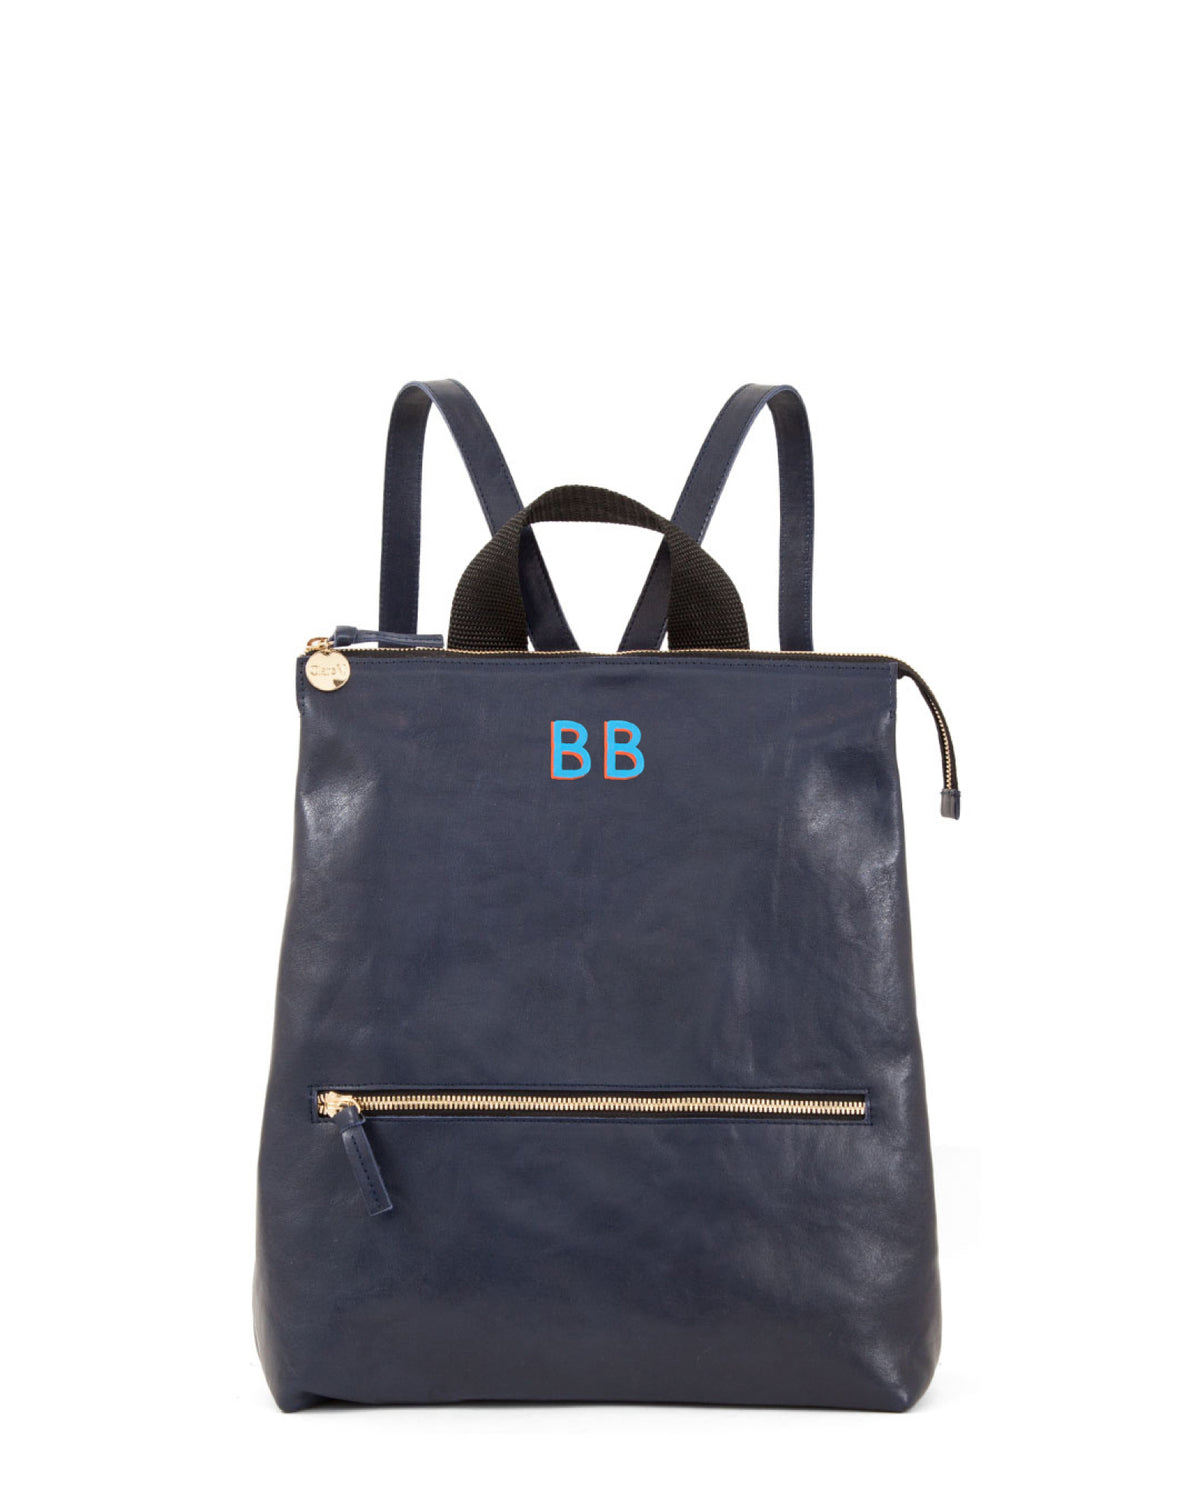 Navy Remi Backpack with 1 Inch Hand Painted Letters In The Top Center Placement.